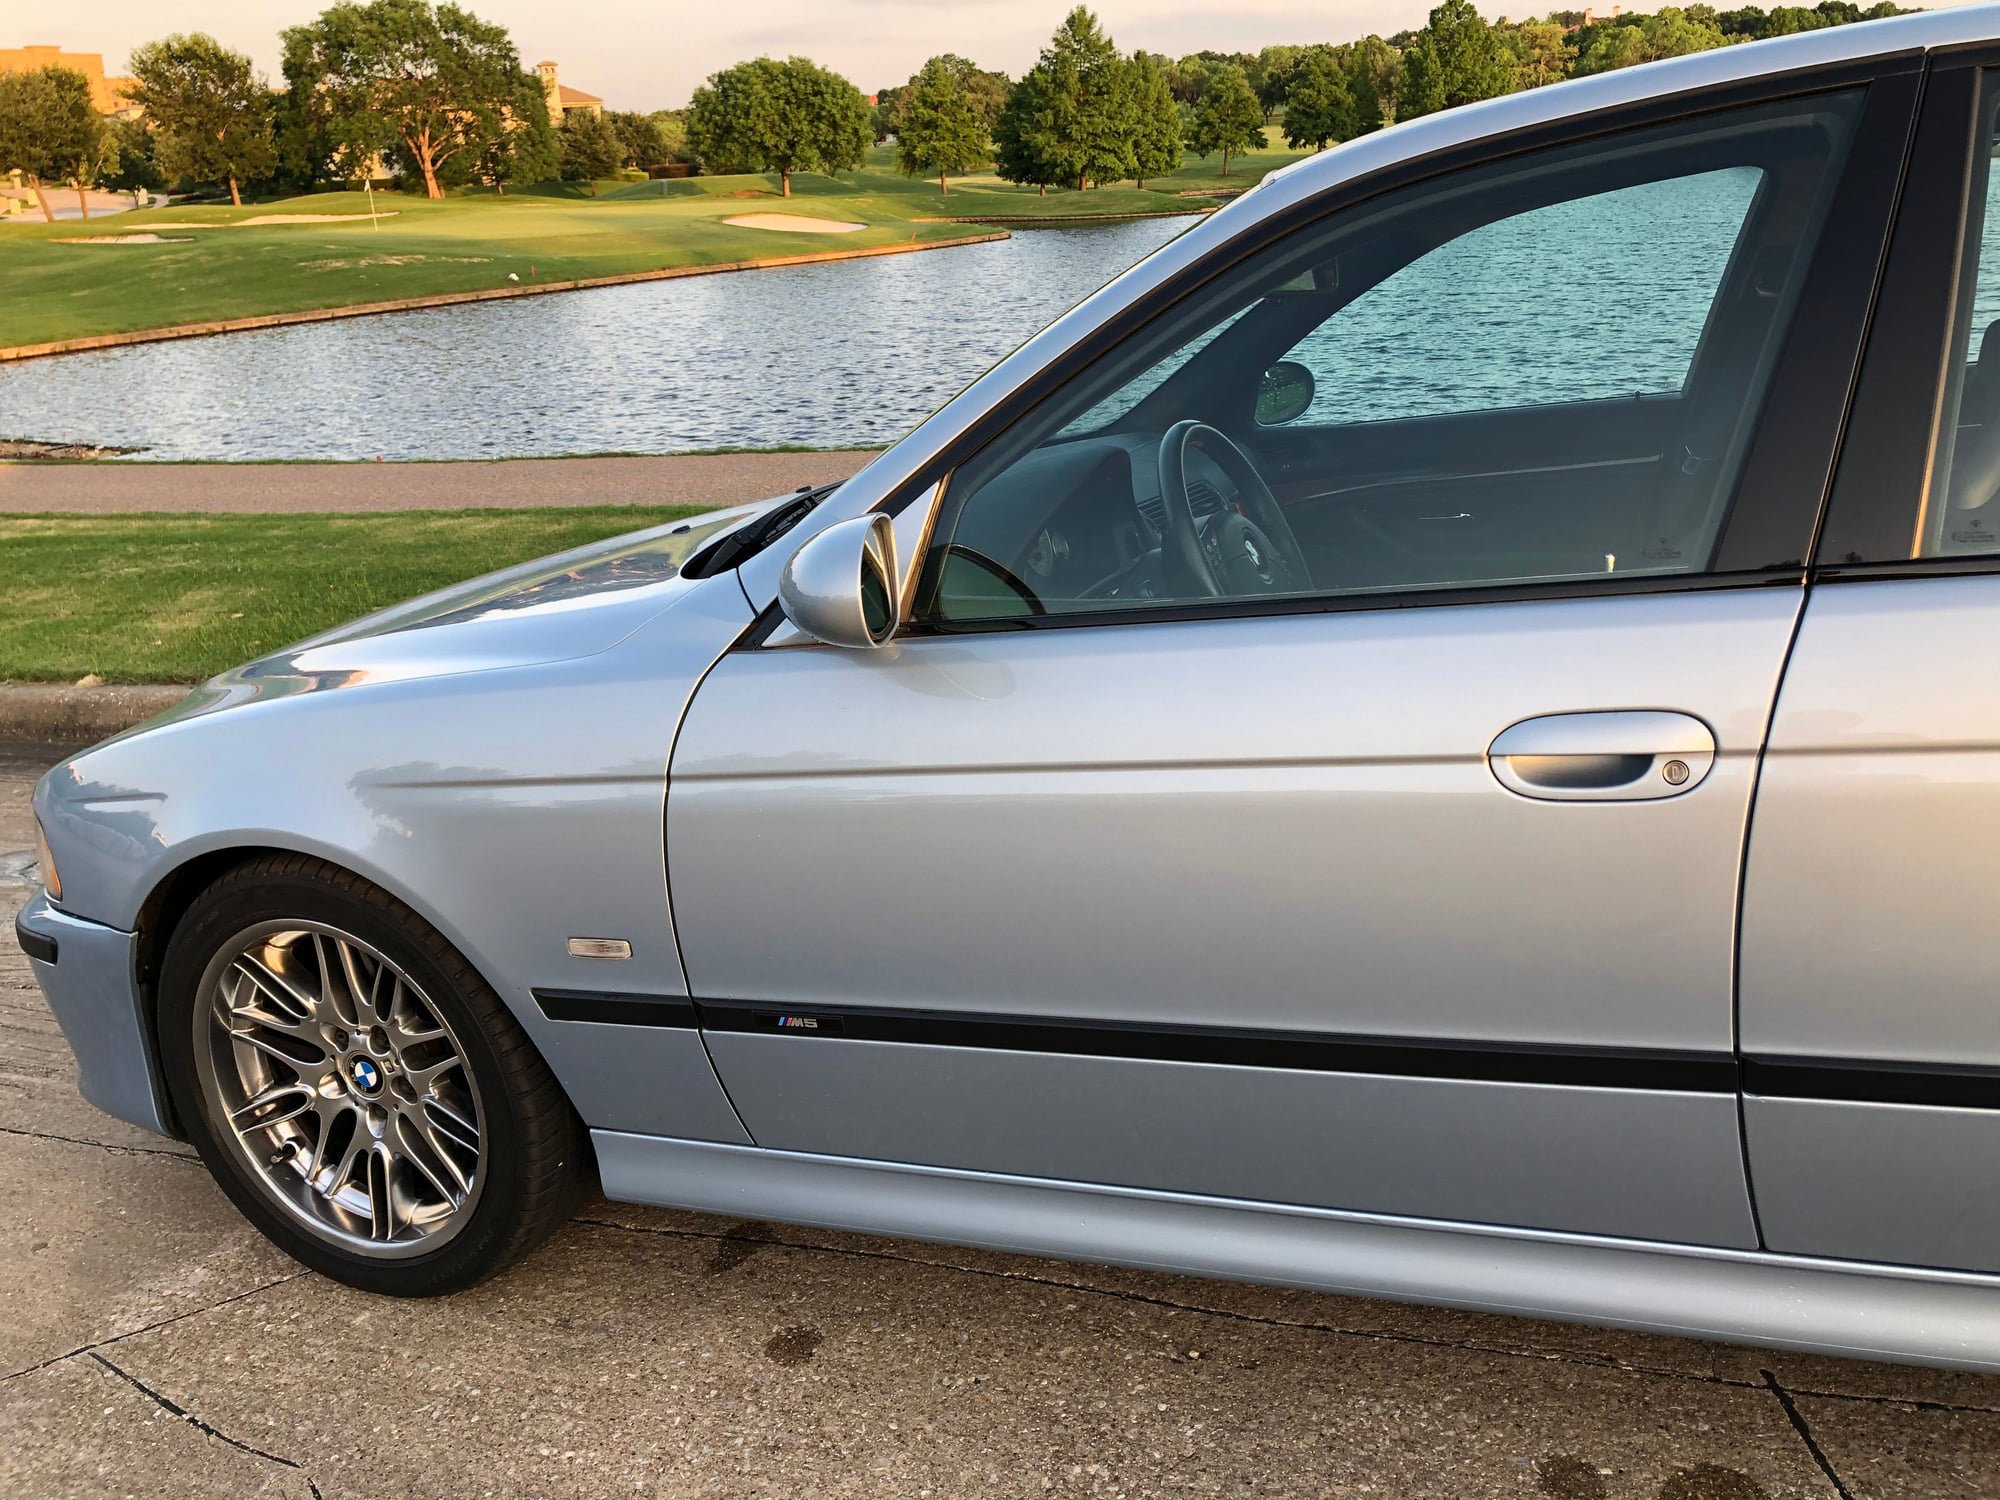 2000 BMW M5 - Bmw m5 e39 - Used - VIN Wbsde9343ybz96134 - 83,000 Miles - 8 cyl - 2WD - Sedan - Other - Irving, TX 75038, United States